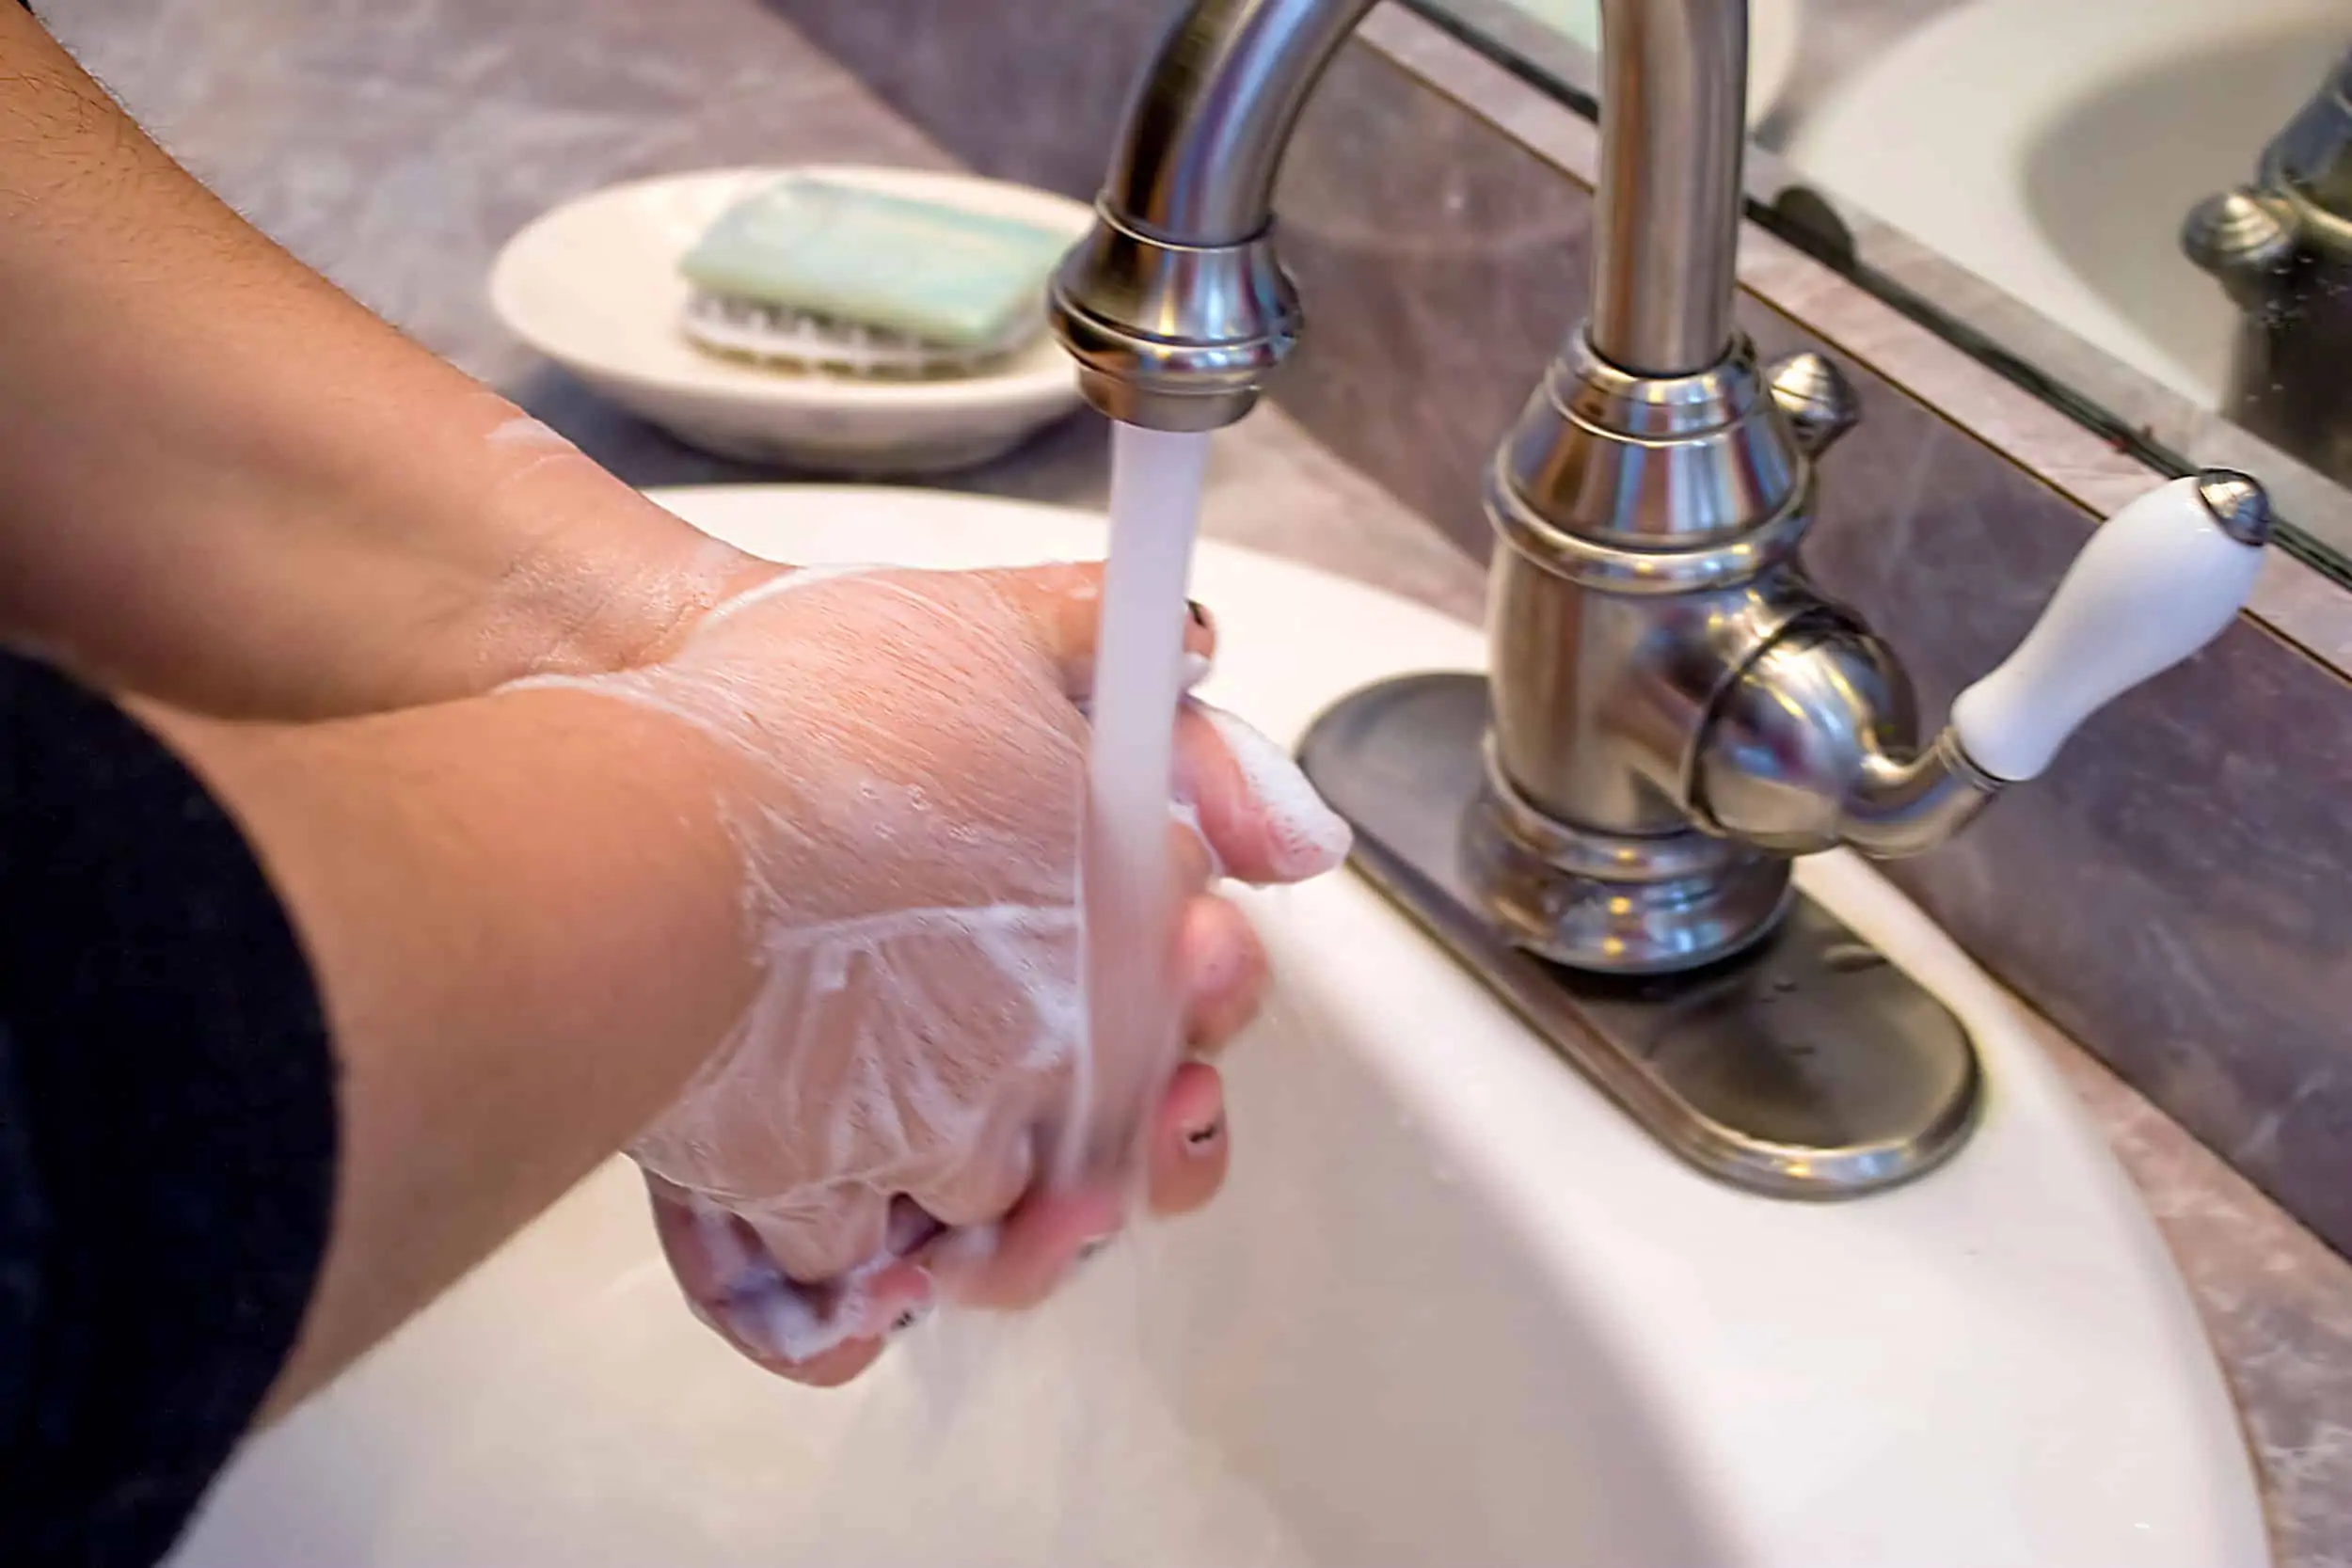 WARNING-FROM-FDA-HAND-SANITIZERS-MAY-BE-TOXIC